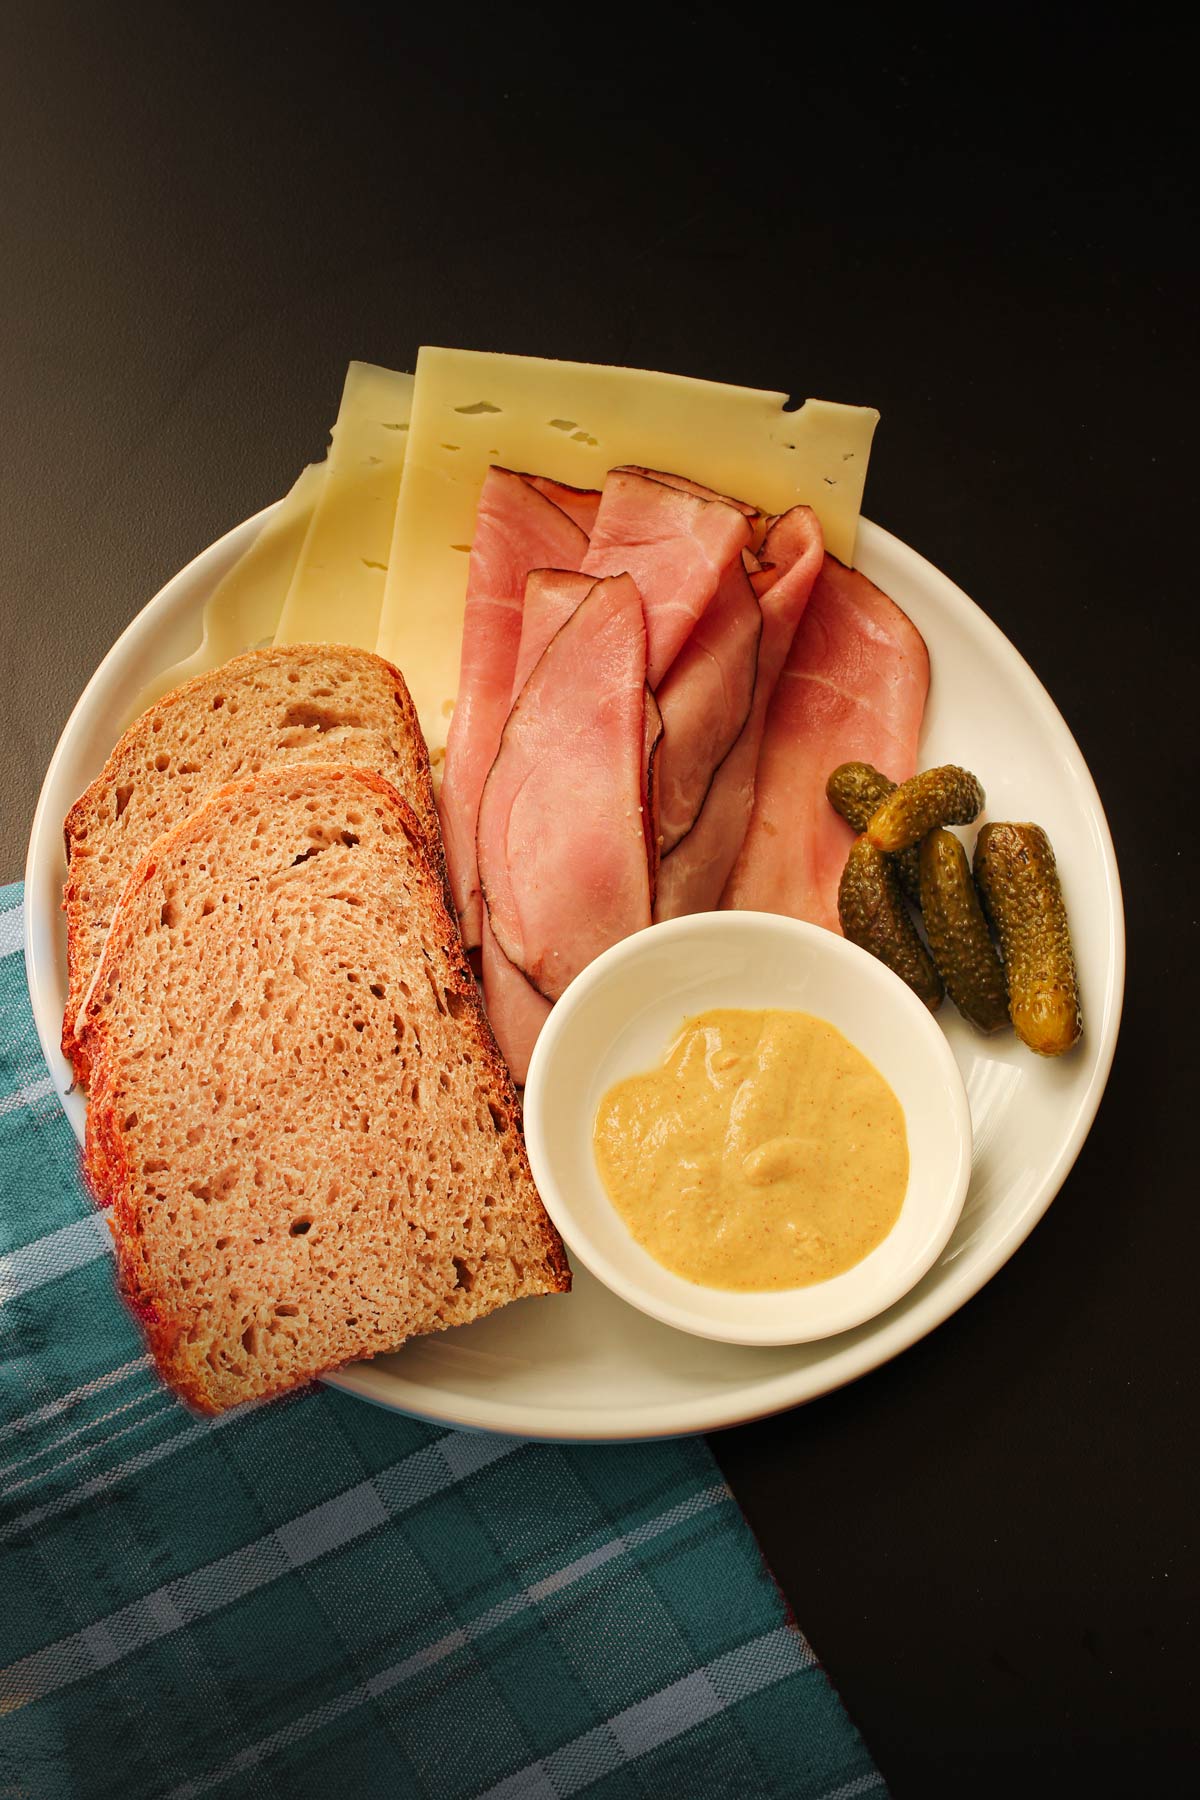 plate with slices of sourdough rye bread as well as ham, cheese, cornichons, and a small dish of mustard.